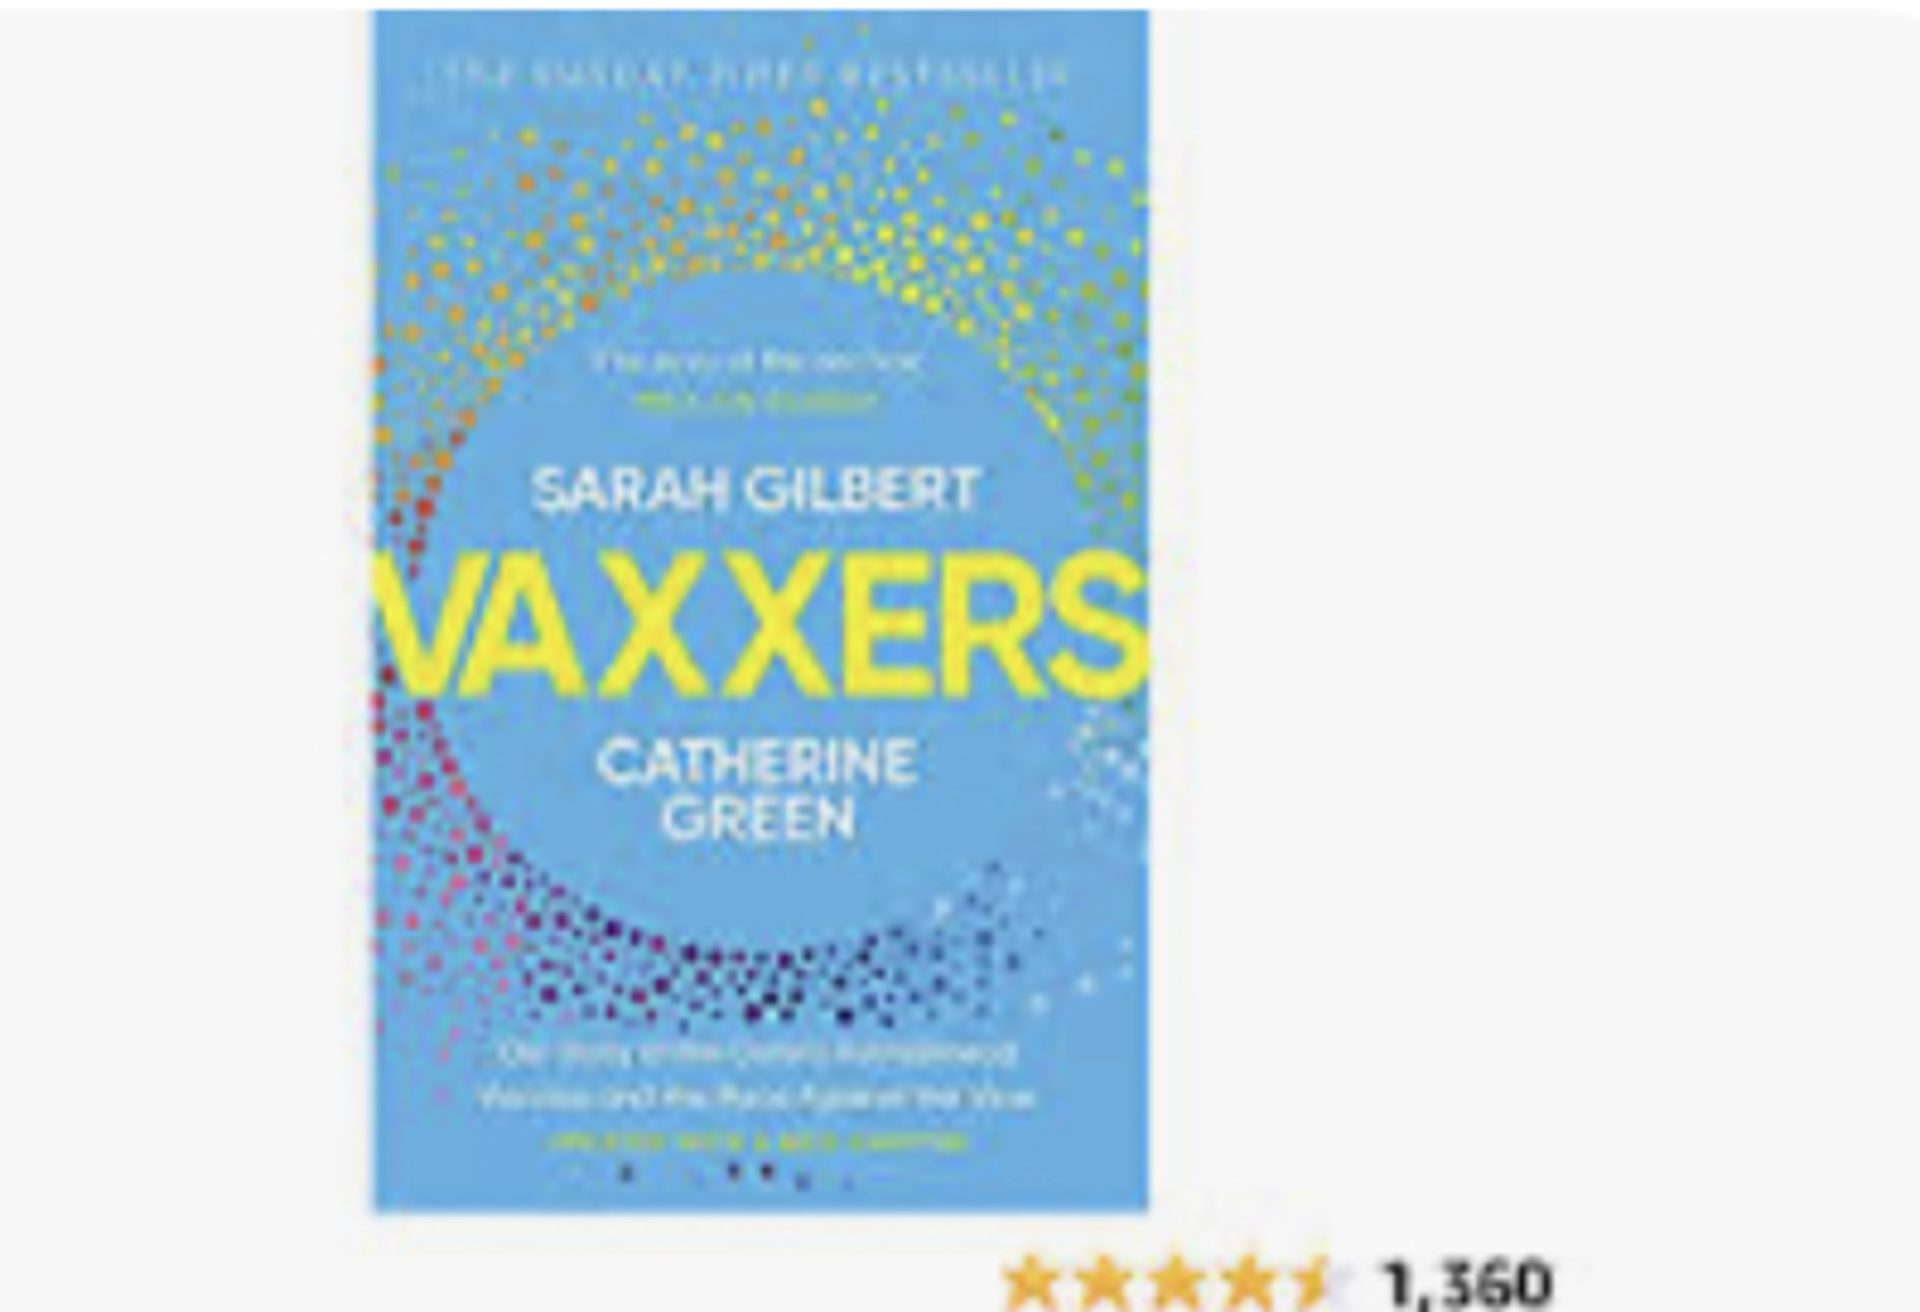 RRP £1500 (Aprox Count 90) Pallet To Contain Books: Vaxxers A Pioneering Moment In Scientific